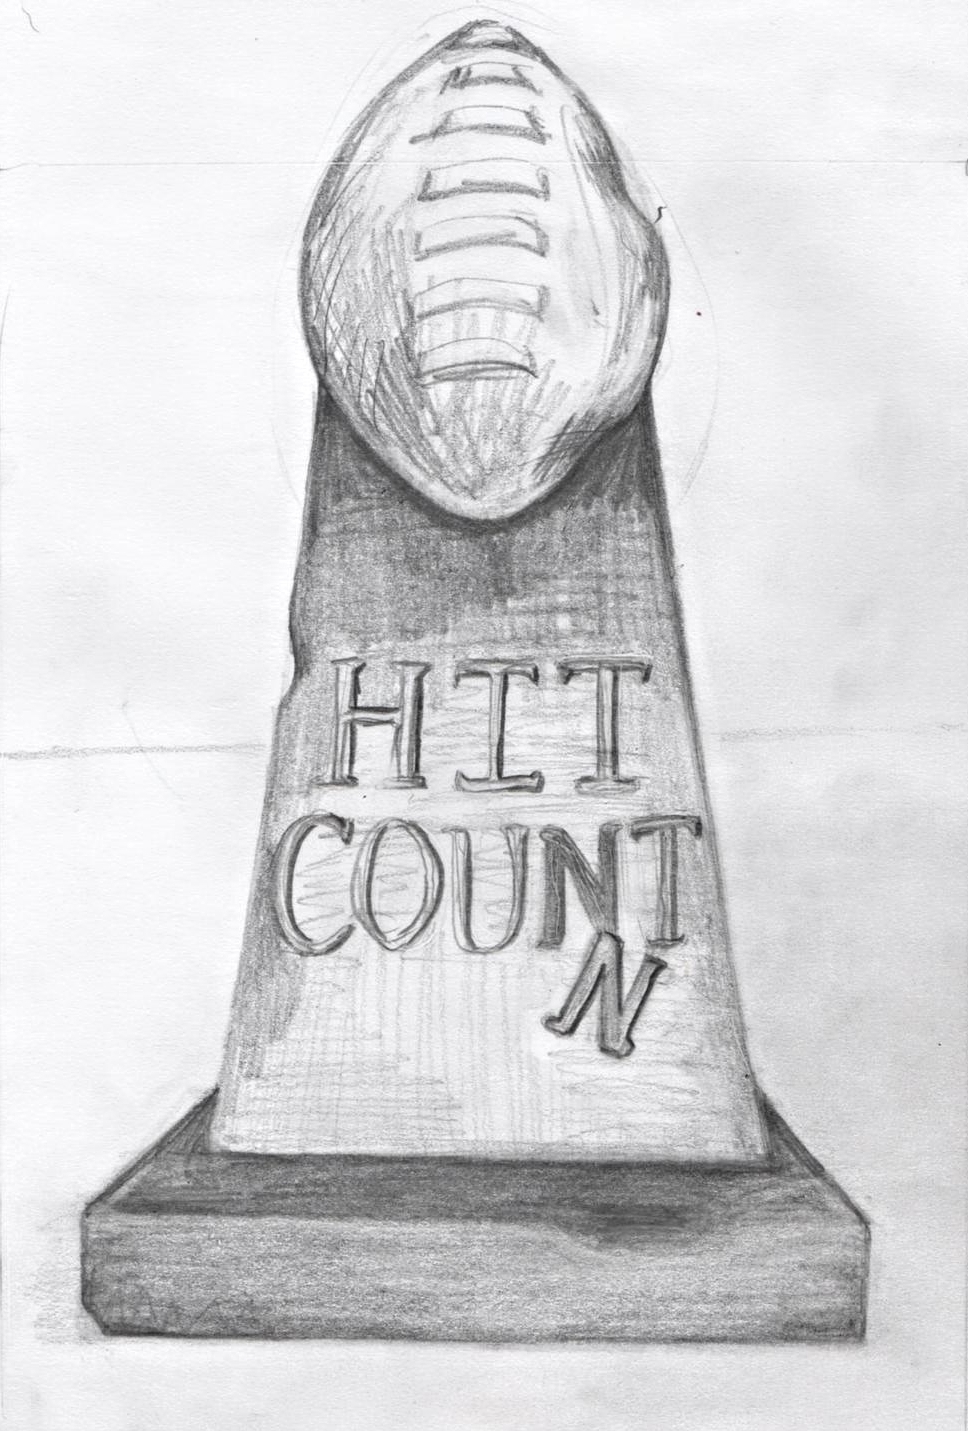 "Hit Count" book cover sketch